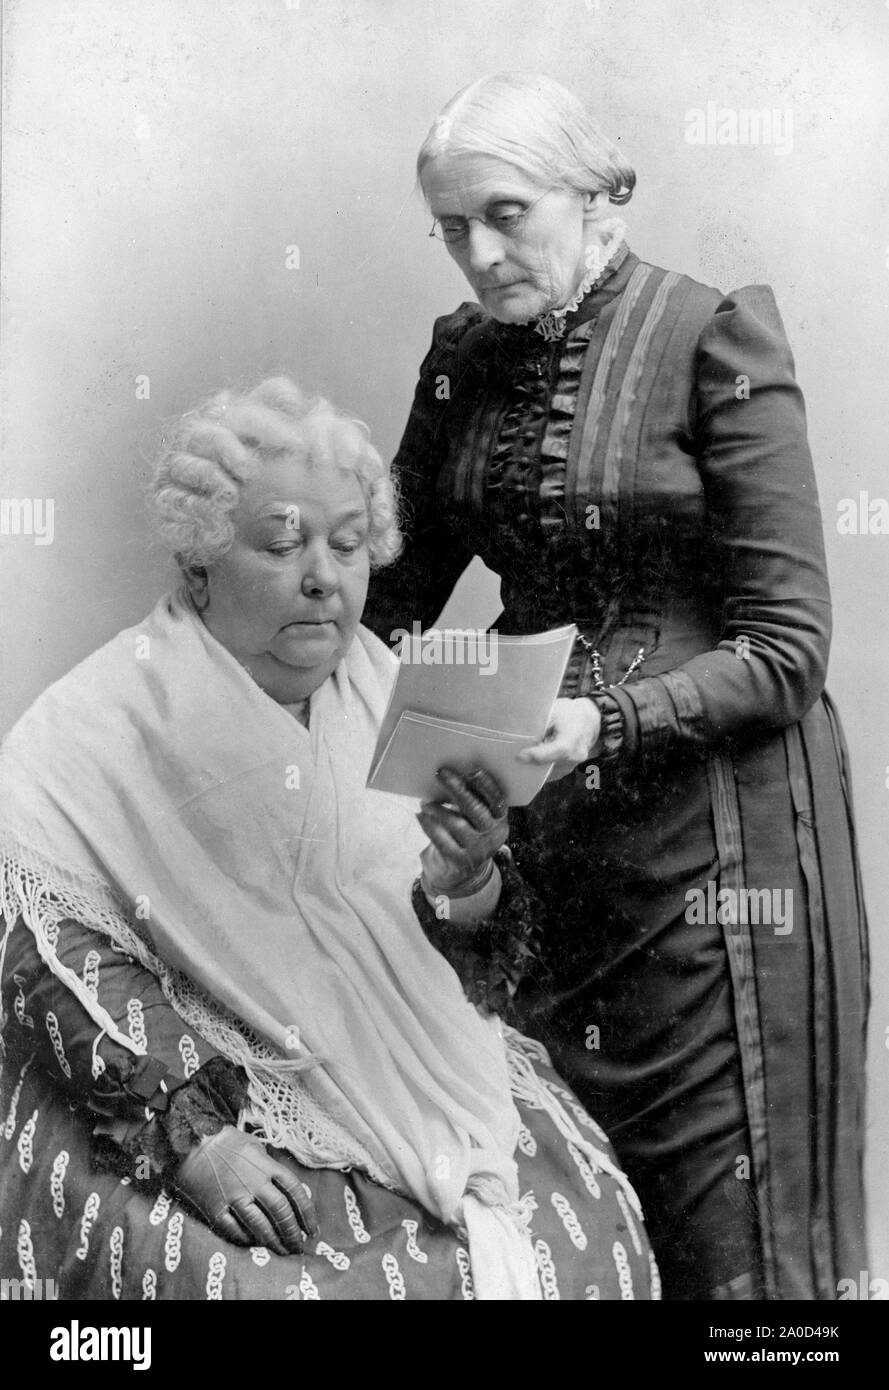 Susan B. Anthony (standing) and Elizabeth Cady Stanton (seated). Susan B. Anthony (February 15, 1820 – March 13, 1906) was an American social reformer and women's rights activist who played a pivotal role in the women's suffrage movement. Born into a Quaker family committed to social equality, she collected anti-slavery petitions at the age of 17. In 1856, she became the New York state agent for the American Anti-Slavery Society.  In 1851, she met Elizabeth Cady Stanton, who became her lifelong friend and co-worker in social reform activities. Stock Photo